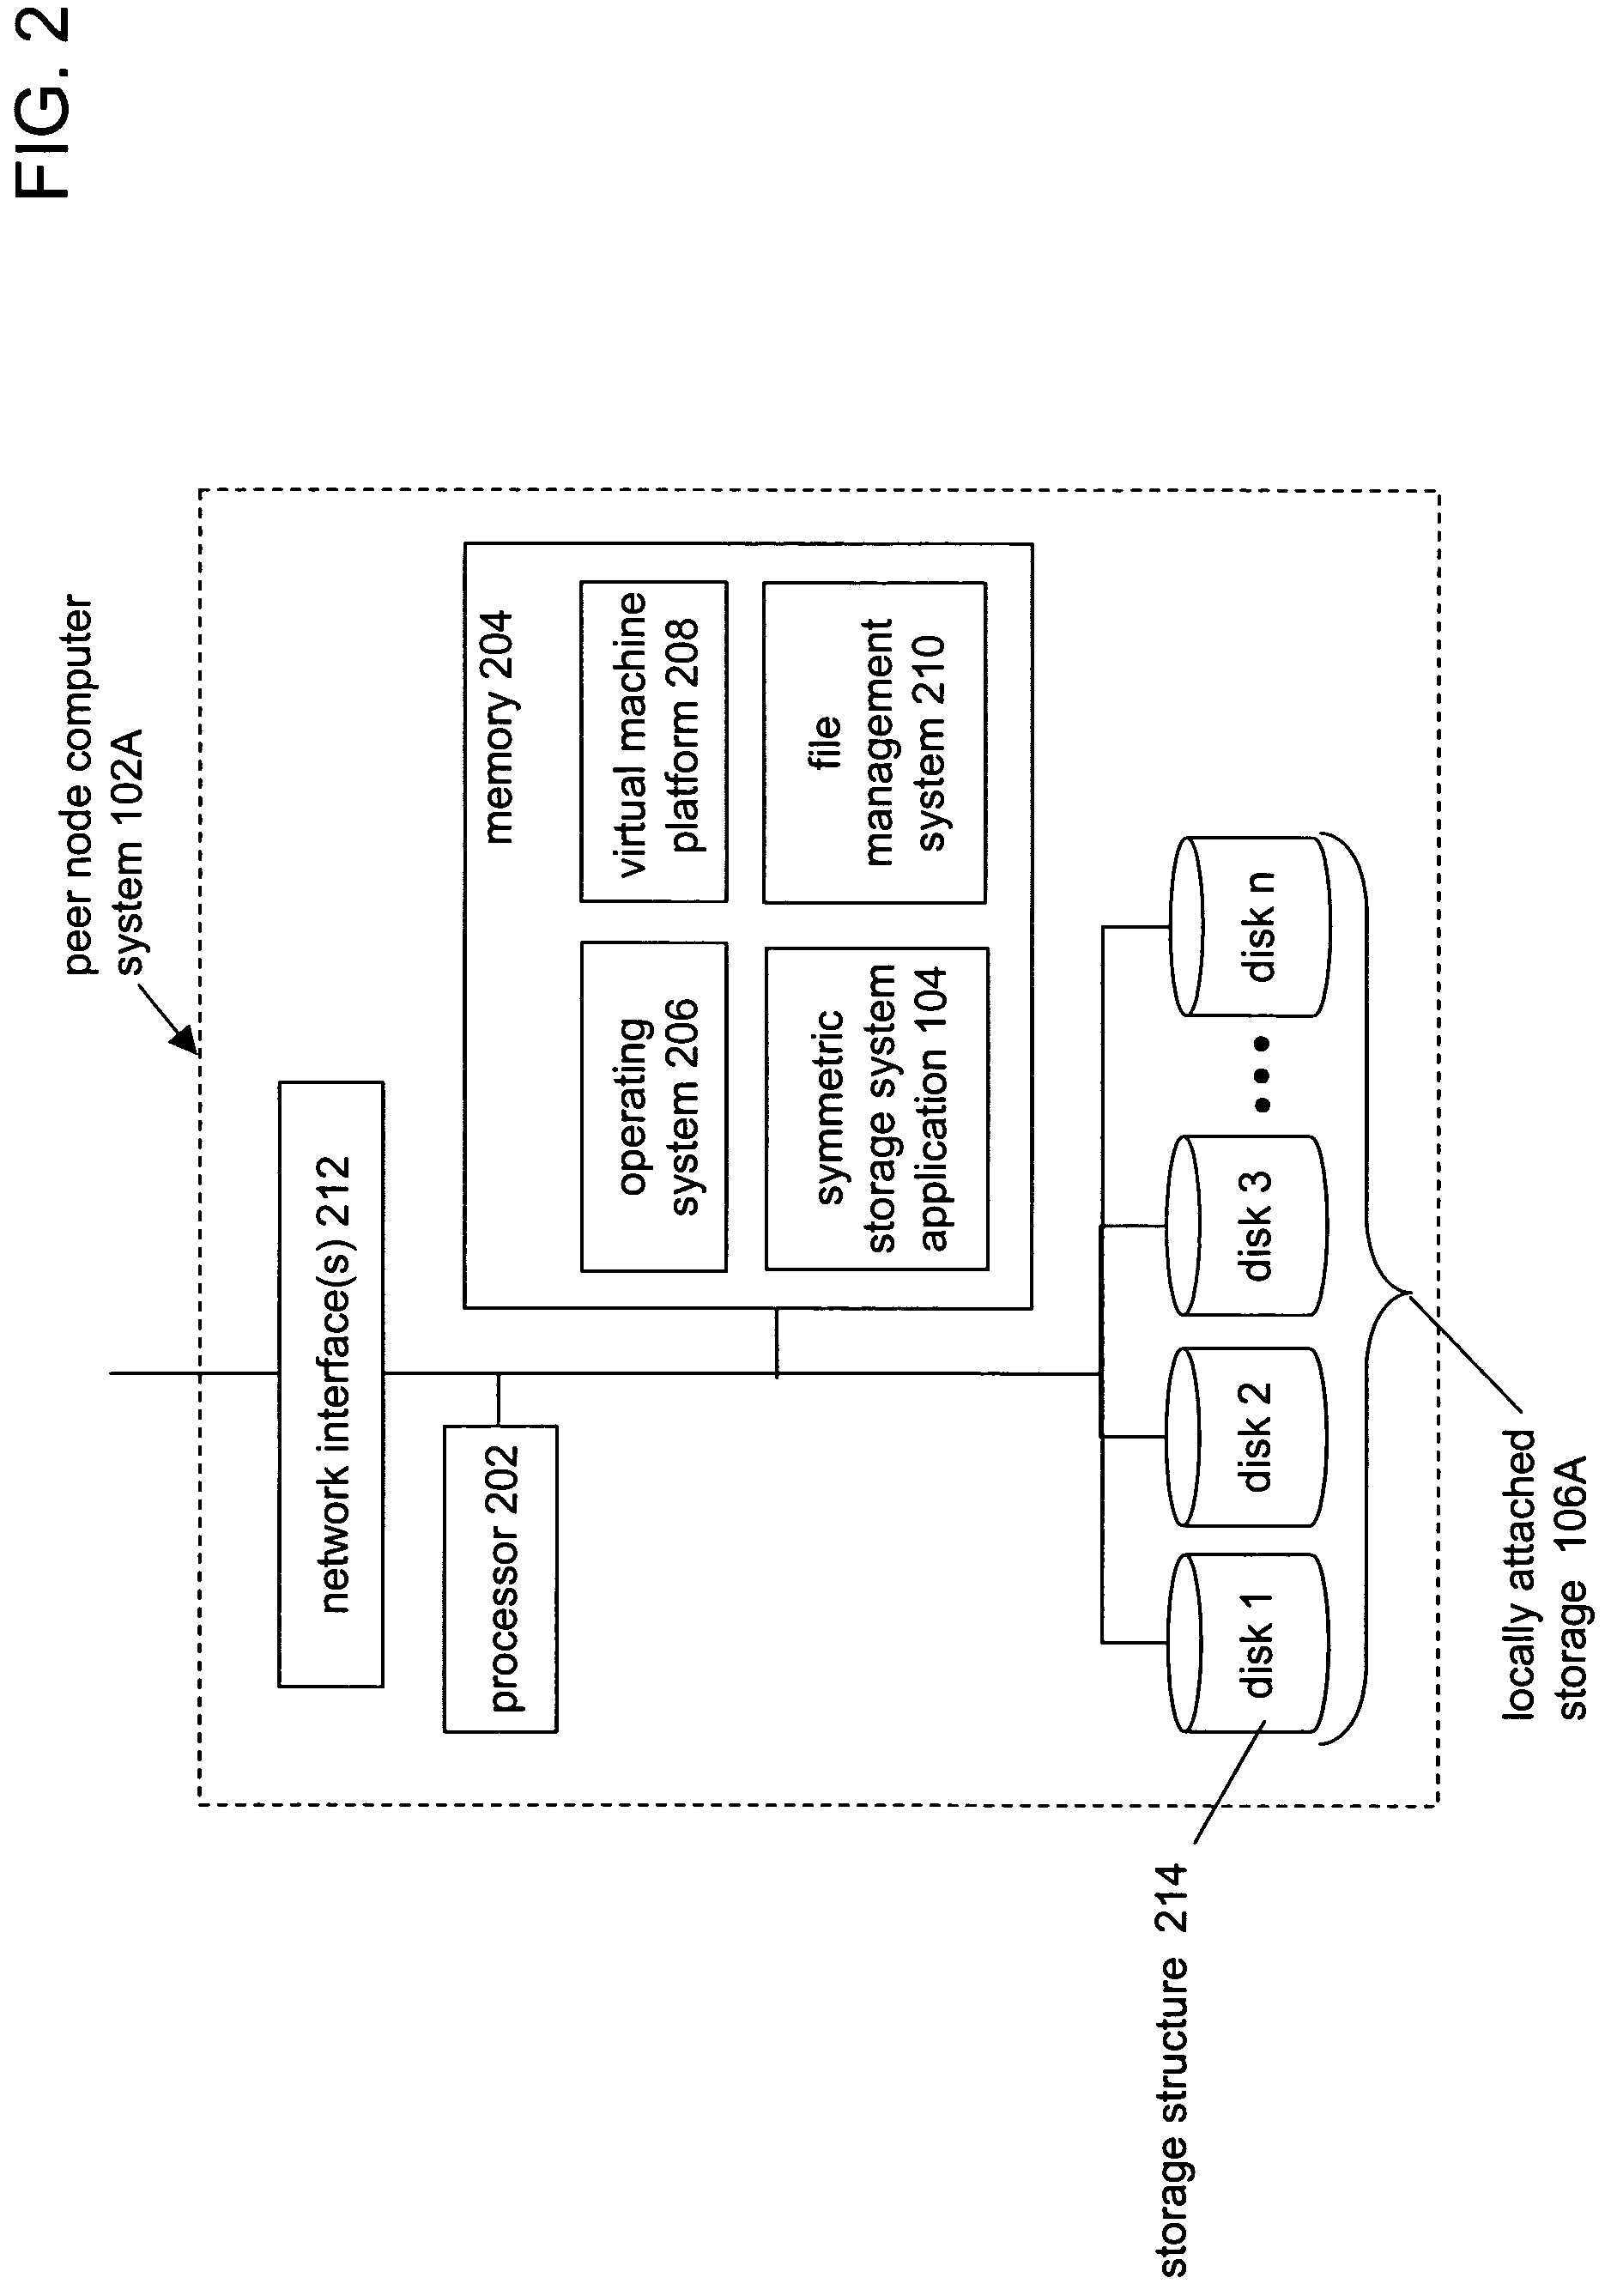 Method for load spreading of requests in a distributed data storage system